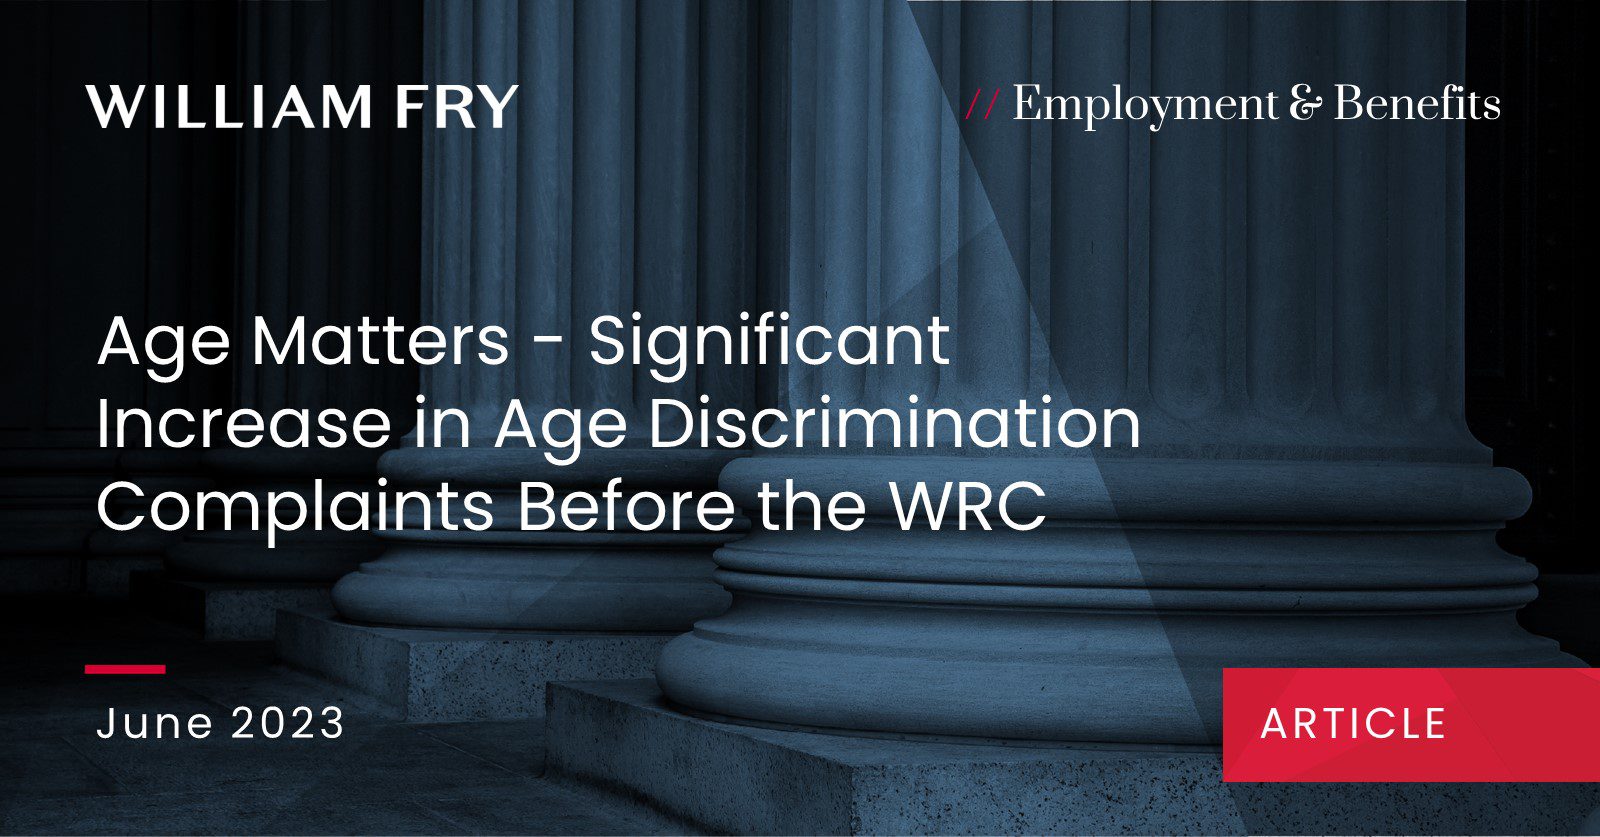 Age Matters - Significant Increase in Age Discrimination Complaints Before the WRC